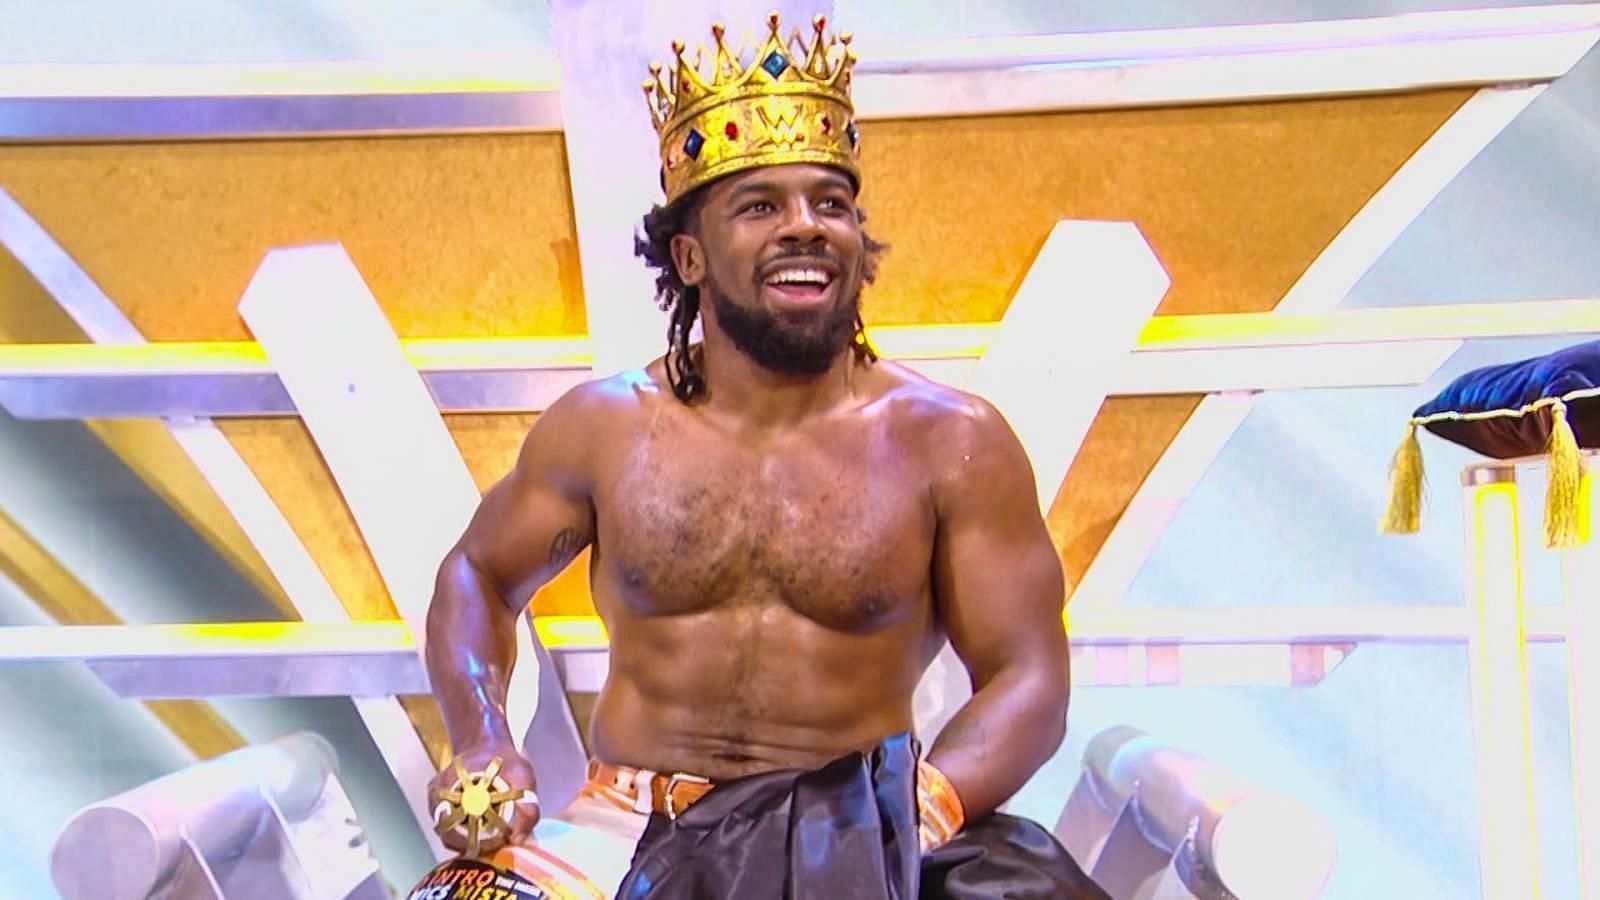 Xavier Woods won the 2021 King of the Ring tournament